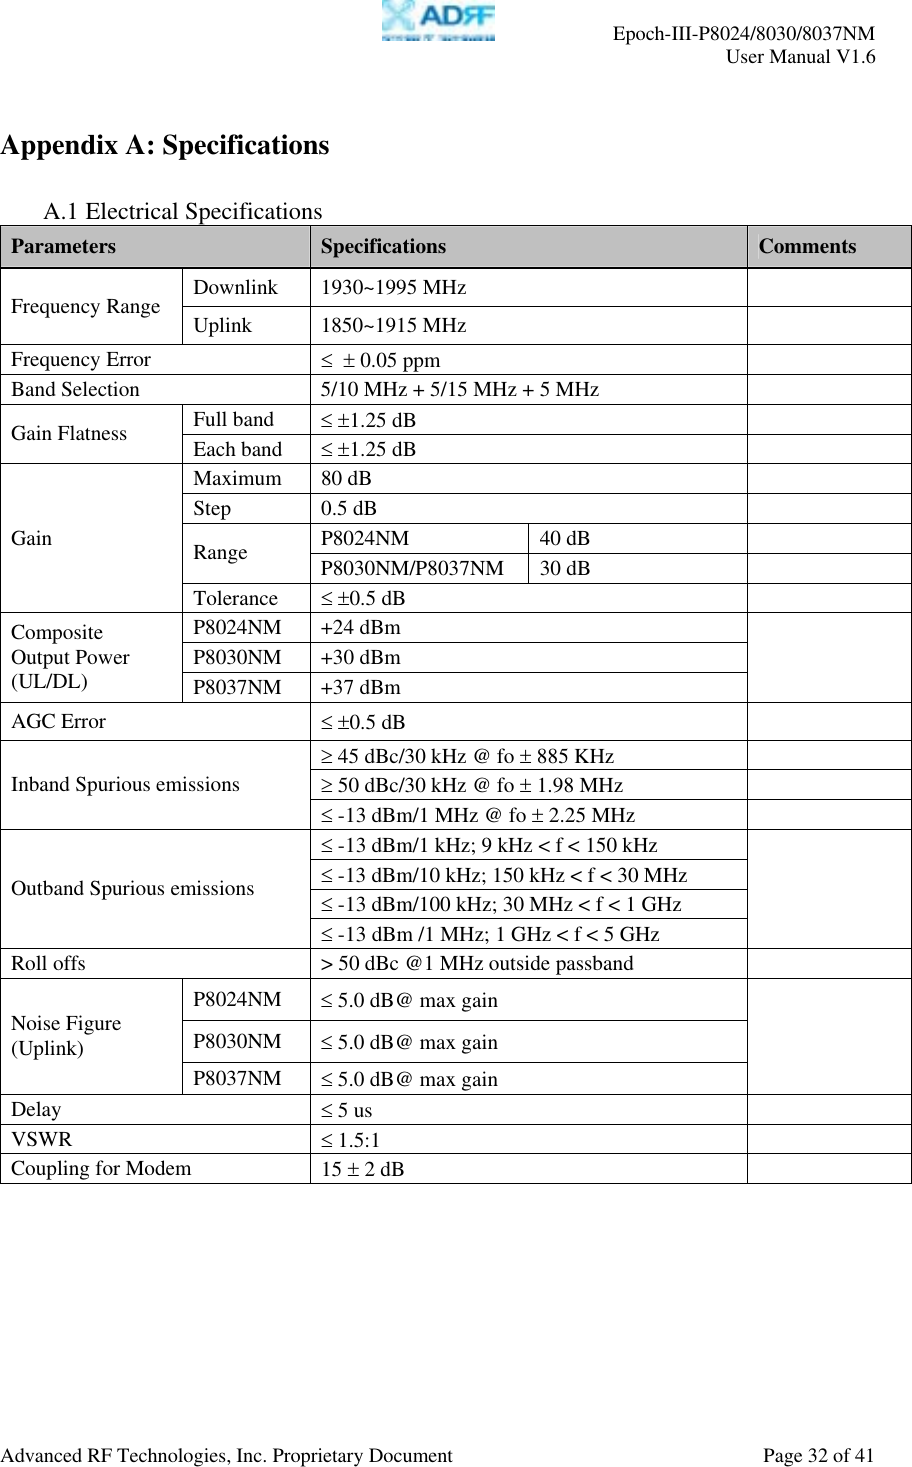     Epoch-III-P8024/8030/8037NM  User Manual V1.6  Advanced RF Technologies, Inc. Proprietary Document  Page 32 of 41  Appendix A: Specifications  A.1 Electrical Specifications Parameters  Specifications  Comments Downlink 1930~1995 MHz   Frequency Range  Uplink 1850~1915 MHz   Frequency Error  ≤  ± 0.05 ppm   Band Selection  5/10 MHz + 5/15 MHz + 5 MHz   Full band  ≤ ±1.25 dB   Gain Flatness  Each band  ≤ ±1.25 dB   Maximum 80 dB   Step 0.5 dB   P8024NM 40 dB   Range  P8030NM/P8037NM 30 dB   Gain Tolerance  ≤ ±0.5 dB   P8024NM +24 dBm P8030NM +30 dBm Composite Output Power (UL/DL)  P8037NM +37 dBm  AGC Error  ≤ ±0.5 dB   ≥ 45 dBc/30 kHz @ fo ± 885 KHz   ≥ 50 dBc/30 kHz @ fo ± 1.98 MHz   Inband Spurious emissions ≤ -13 dBm/1 MHz @ fo ± 2.25 MHz   ≤ -13 dBm/1 kHz; 9 kHz &lt; f &lt; 150 kHz  ≤ -13 dBm/10 kHz; 150 kHz &lt; f &lt; 30 MHz ≤ -13 dBm/100 kHz; 30 MHz &lt; f &lt; 1 GHz Outband Spurious emissions ≤ -13 dBm /1 MHz; 1 GHz &lt; f &lt; 5 GHz  Roll offs  &gt; 50 dBc @1 MHz outside passband   P8024NM  ≤ 5.0 dB@ max gain P8030NM  ≤ 5.0 dB@ max gain Noise Figure (Uplink) P8037NM  ≤ 5.0 dB@ max gain  Delay  ≤ 5 us   VSWR  ≤ 1.5:1   Coupling for Modem  15 ± 2 dB     